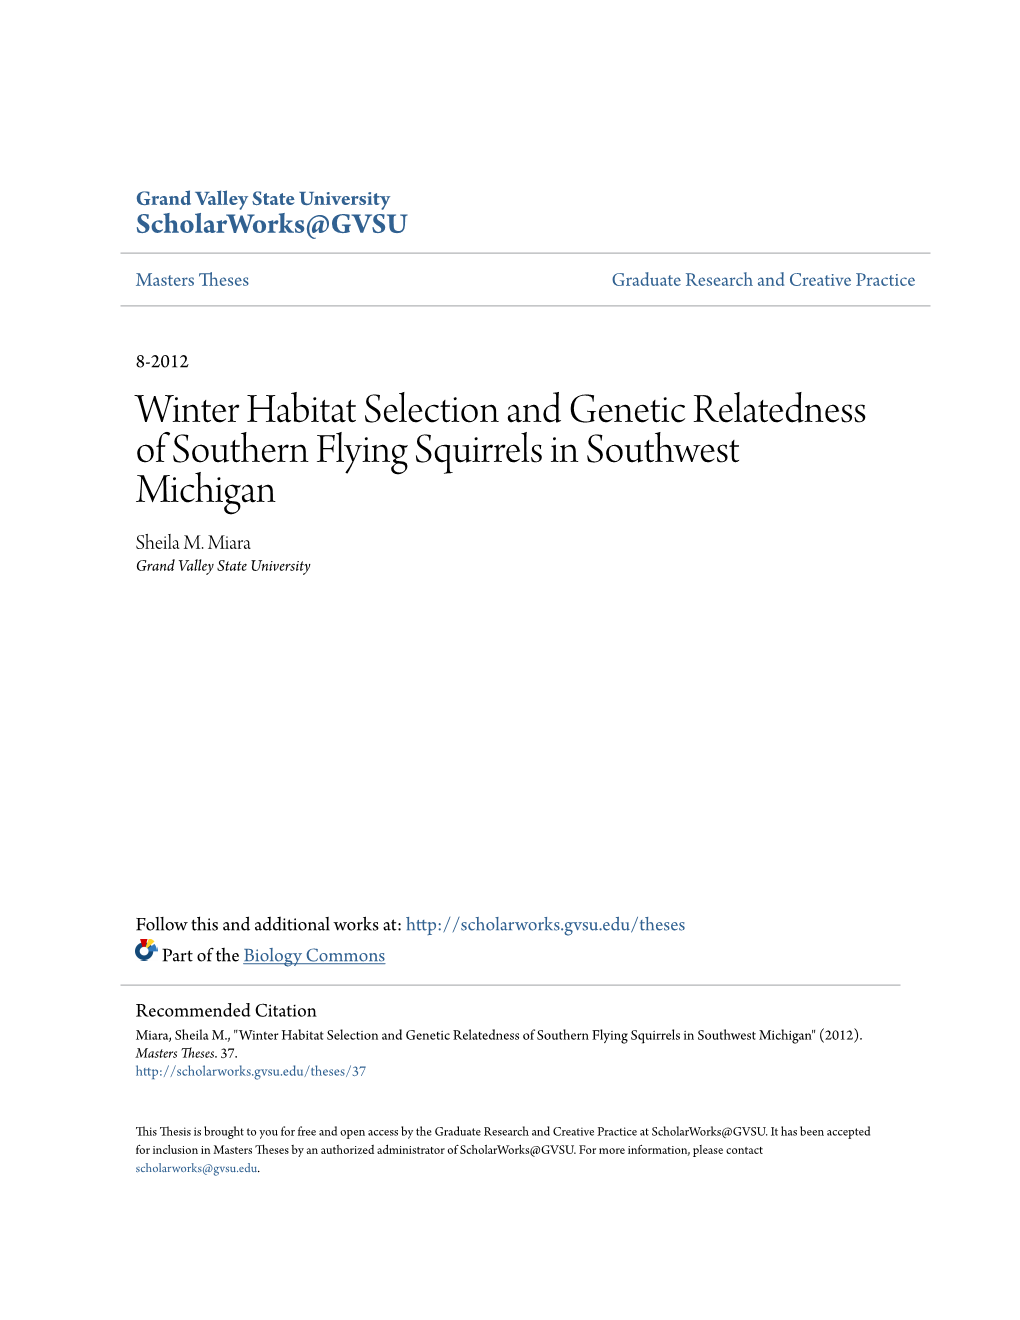 Winter Habitat Selection and Genetic Relatedness of Southern Flying Squirrels in Southwest Michigan Sheila M